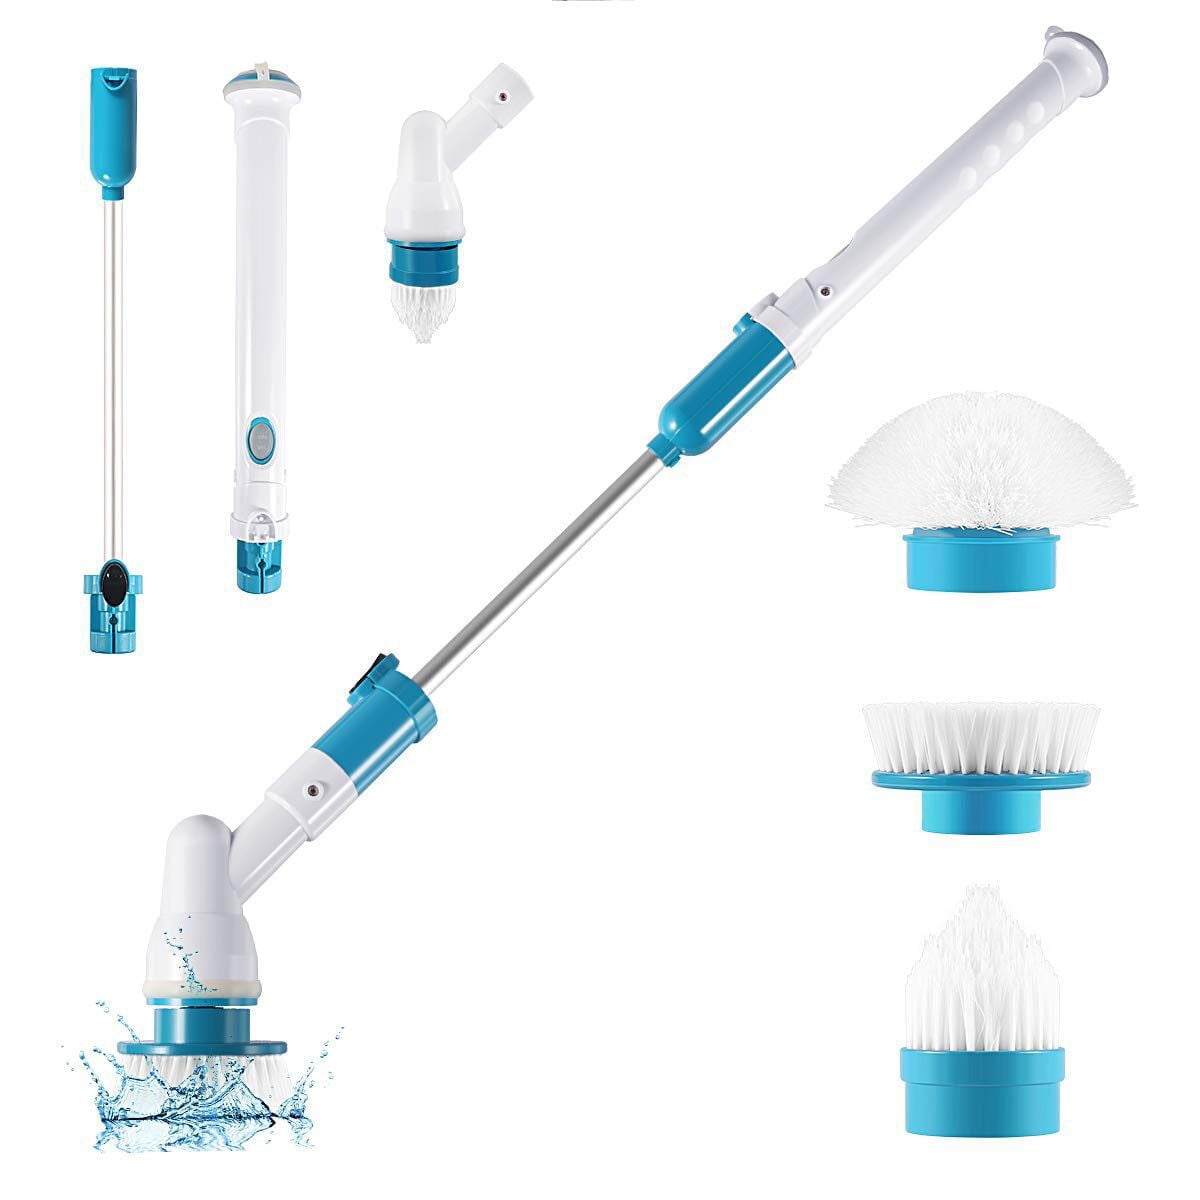 Anself Electric Spin Scrubber Cordless Rechargeable Bathroom Scrubber  Cleaning Brush with 3 Replaceable Brush Heads Extension Handle for Tub,  Tile